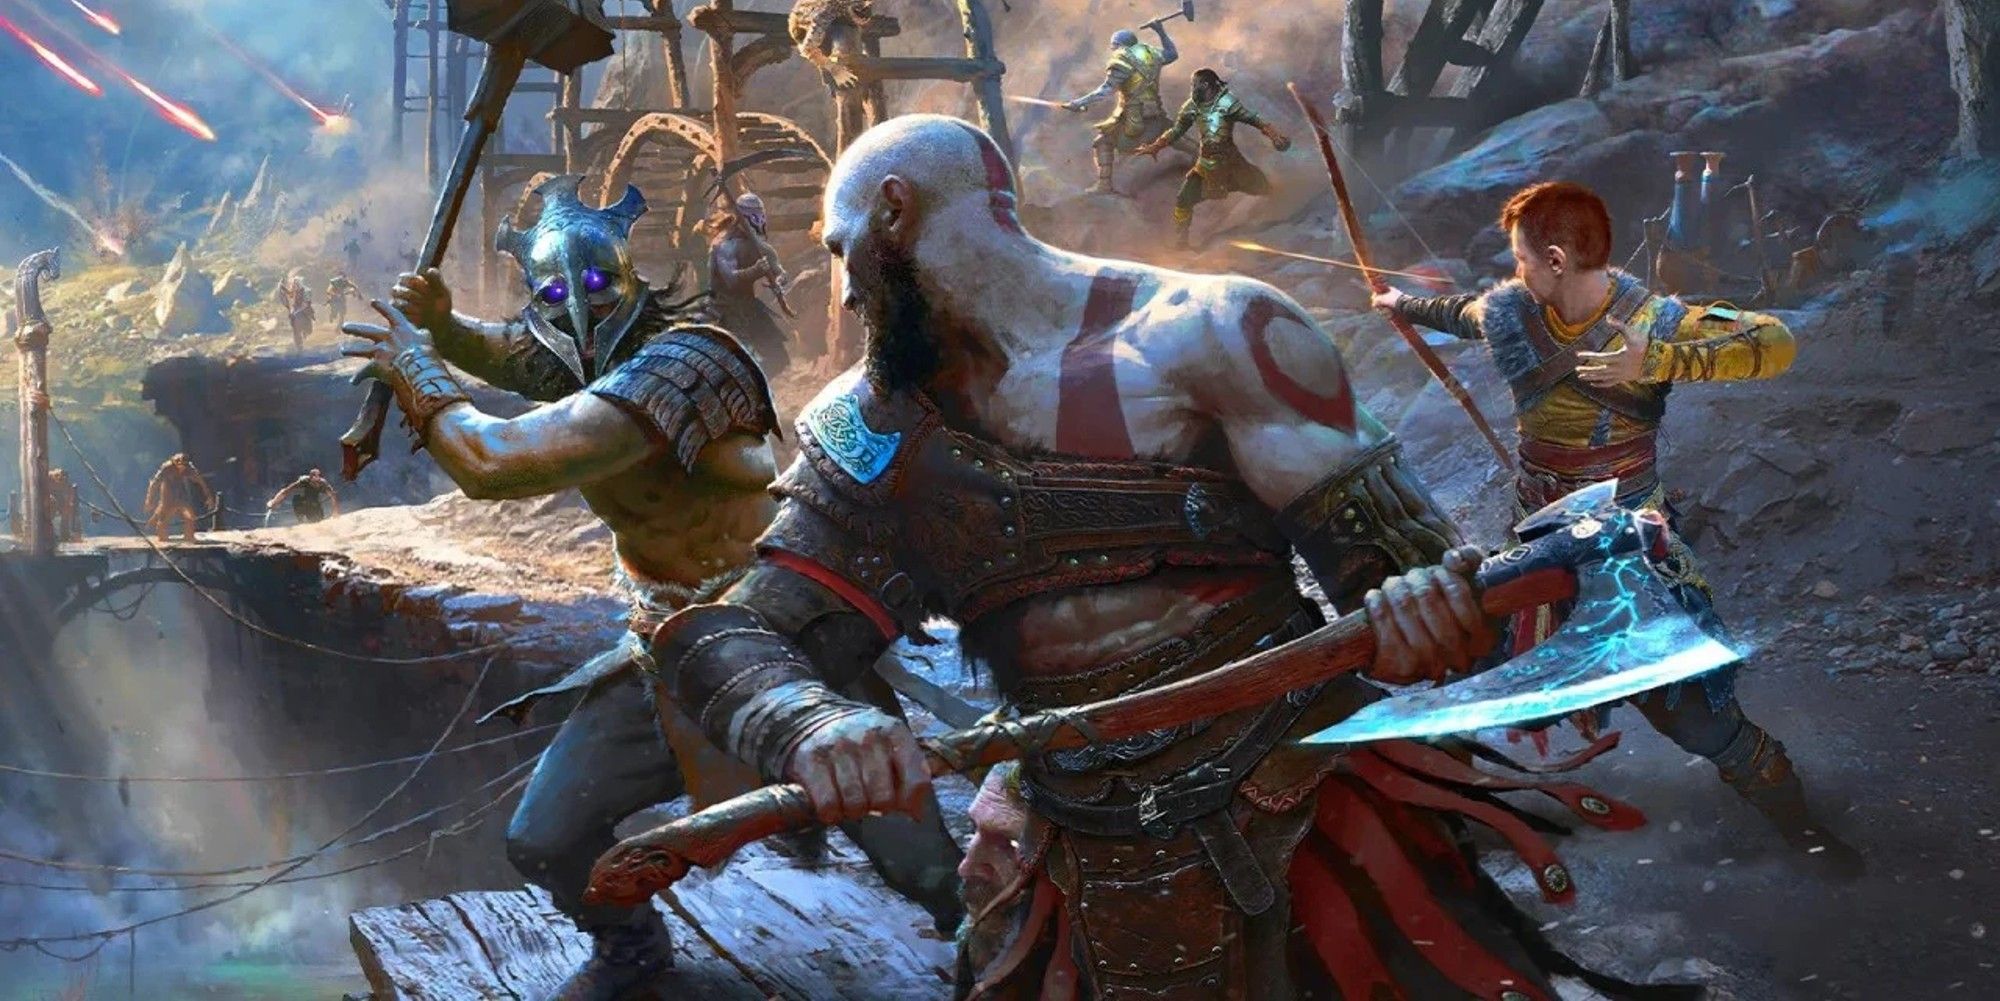 Thoughts on this Odin fanmade concept art? : r/GodofWar